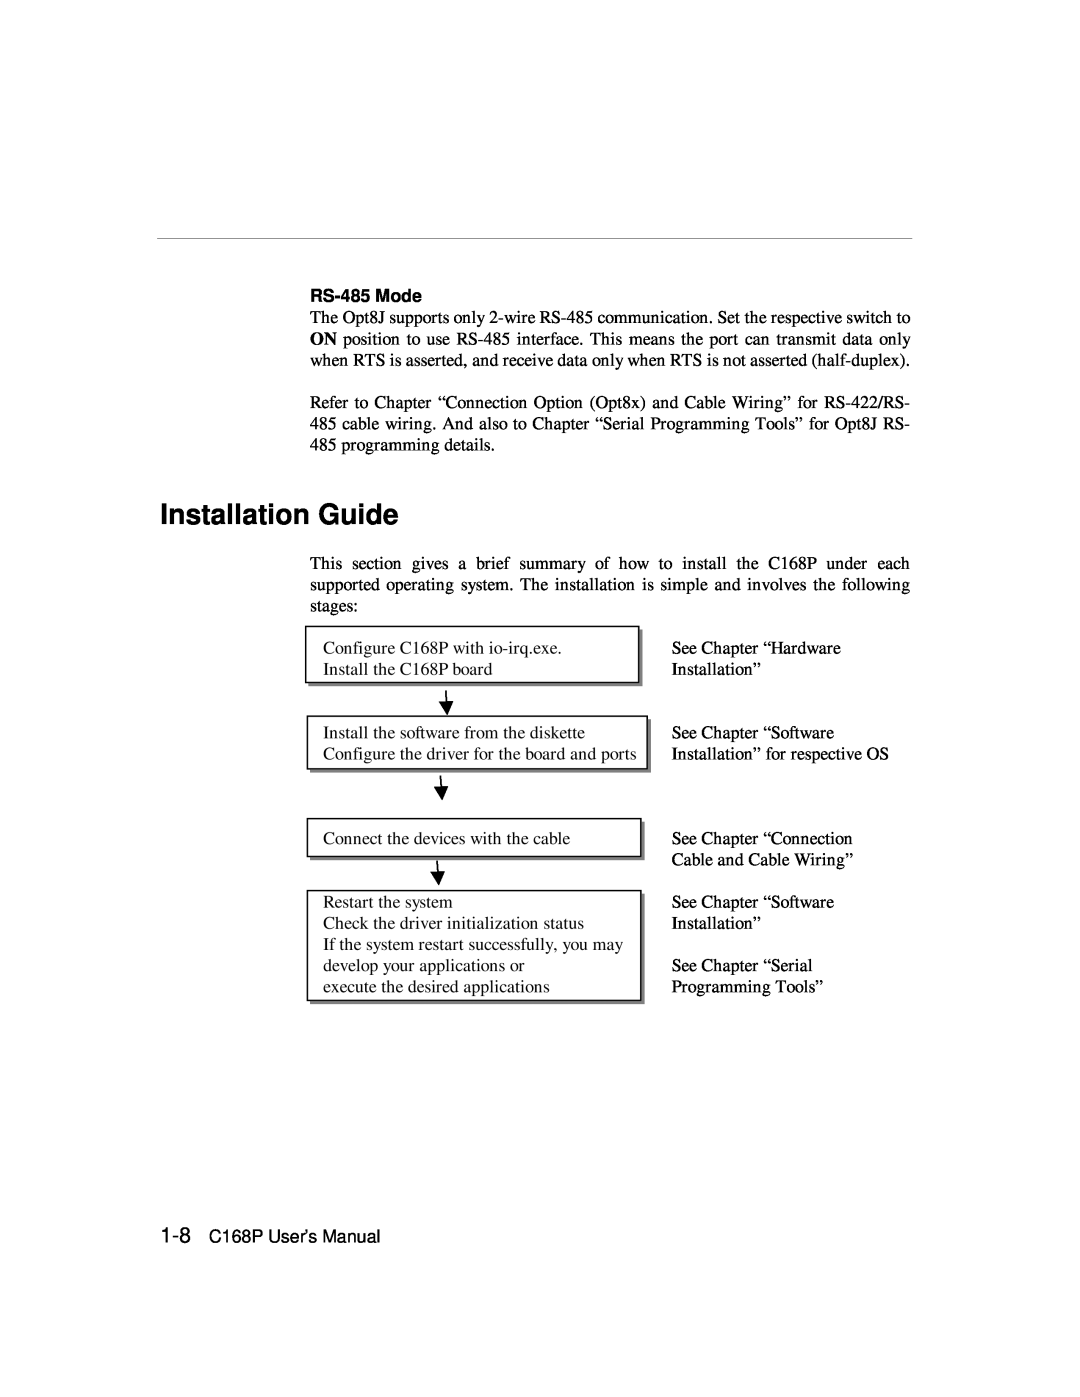 Moxa Technologies C168P user manual Installation Guide, RS-485 Mode 